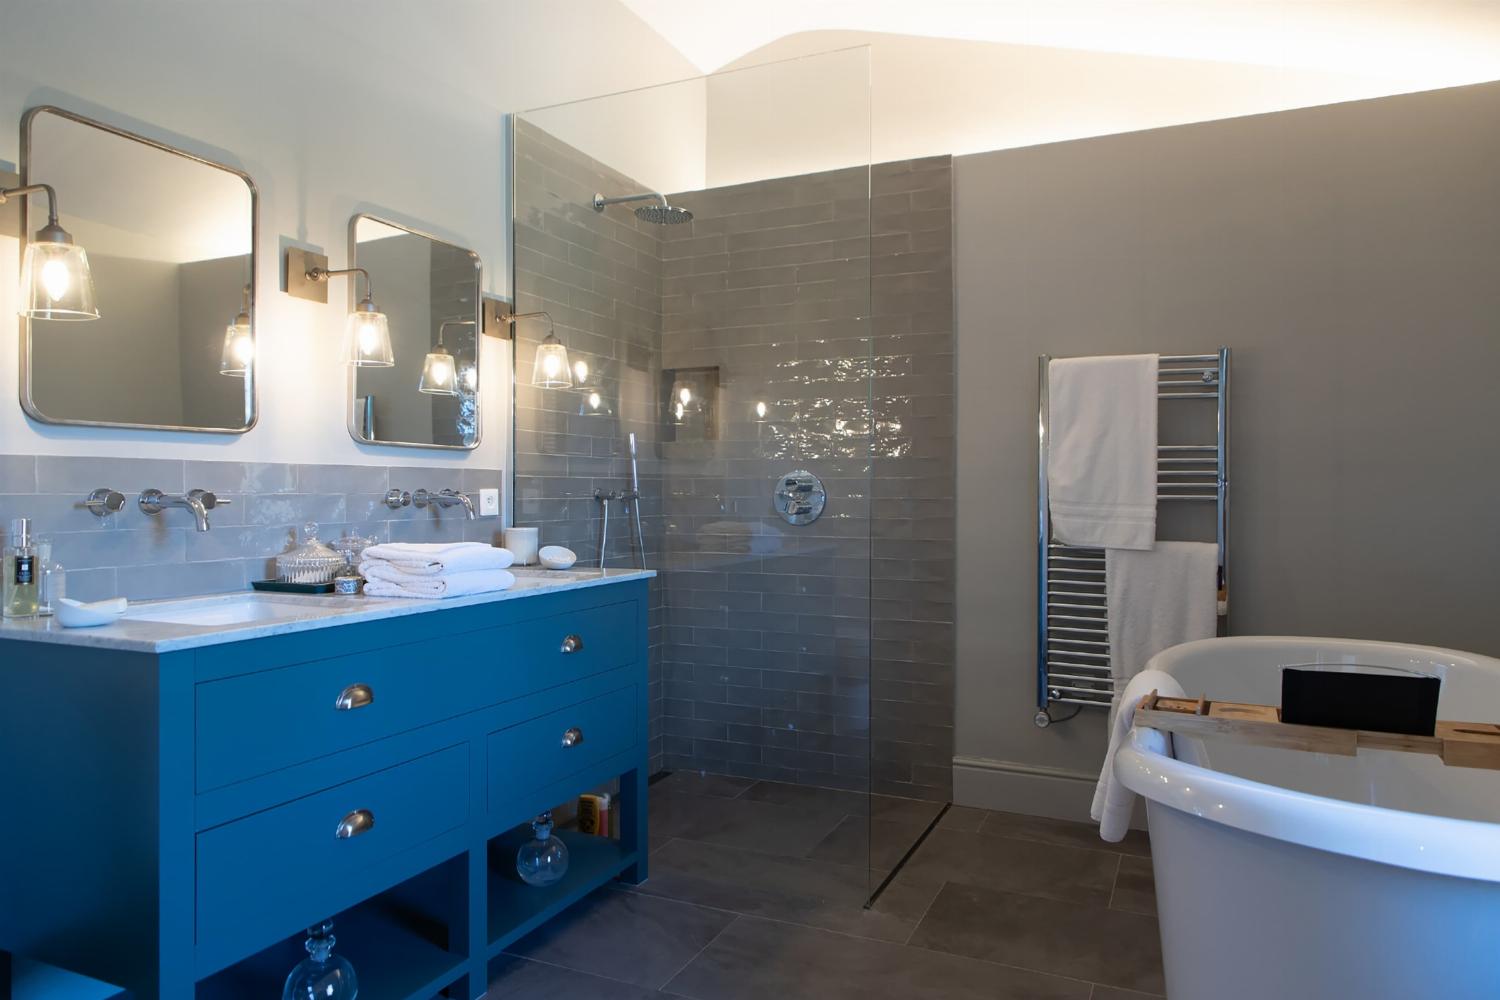 Bathroom | Holiday home in Provence